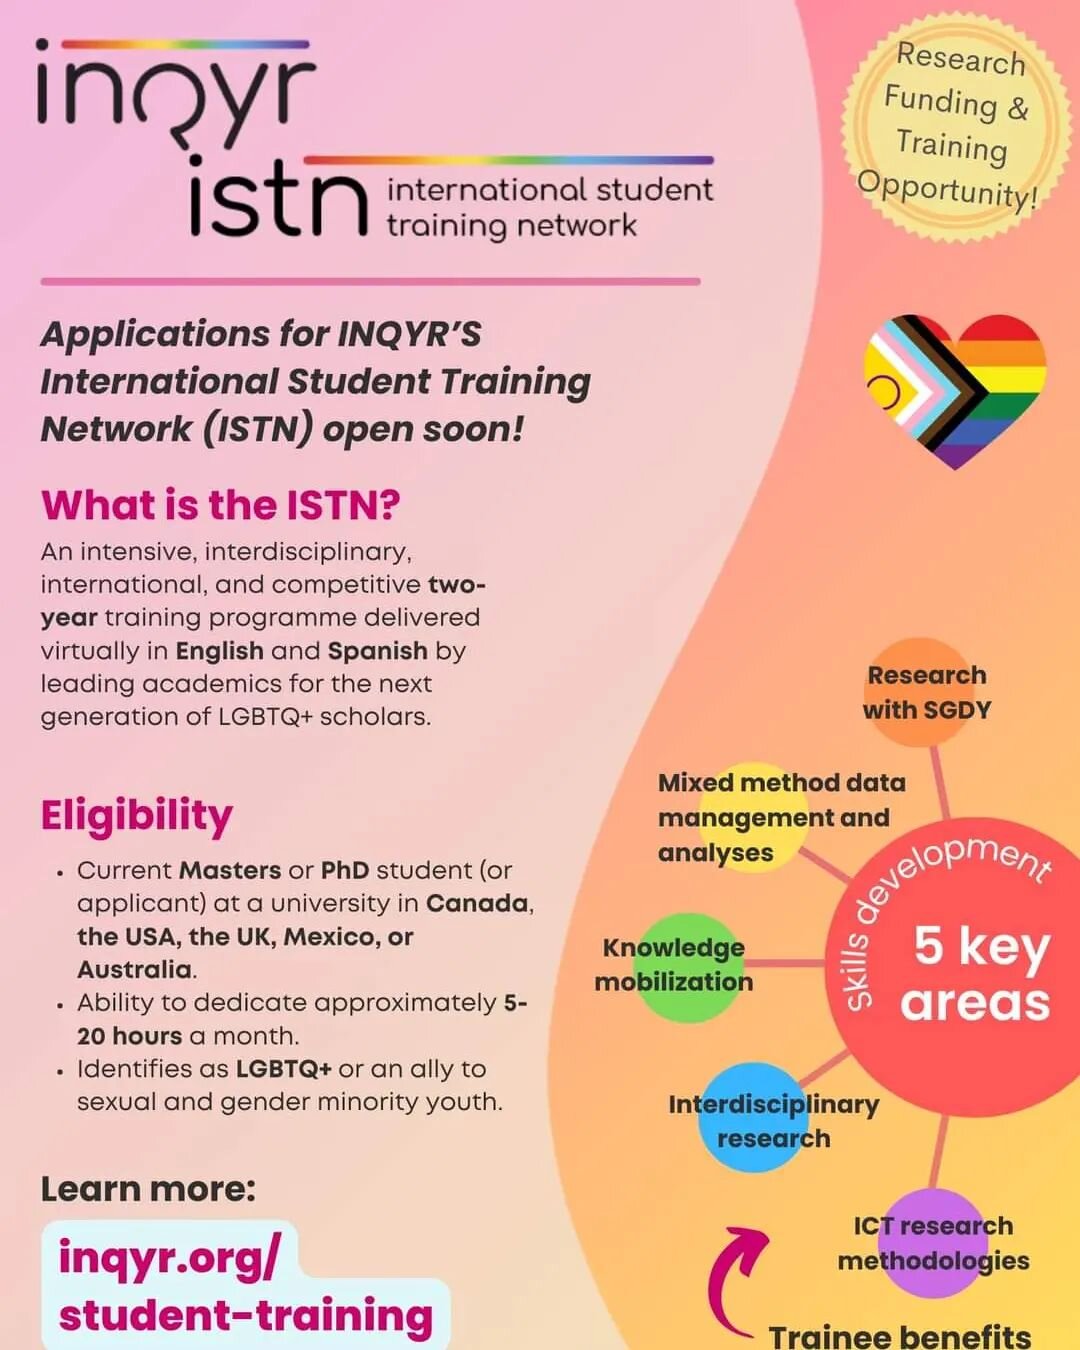 Applications for Cohort 4 of our International Student Training Network (ISTN) will be opening very soon!

The ISTN is a training program for potential or current graduate students (Masters or PhD) interested in research with LGBTQ+ youth, at univers